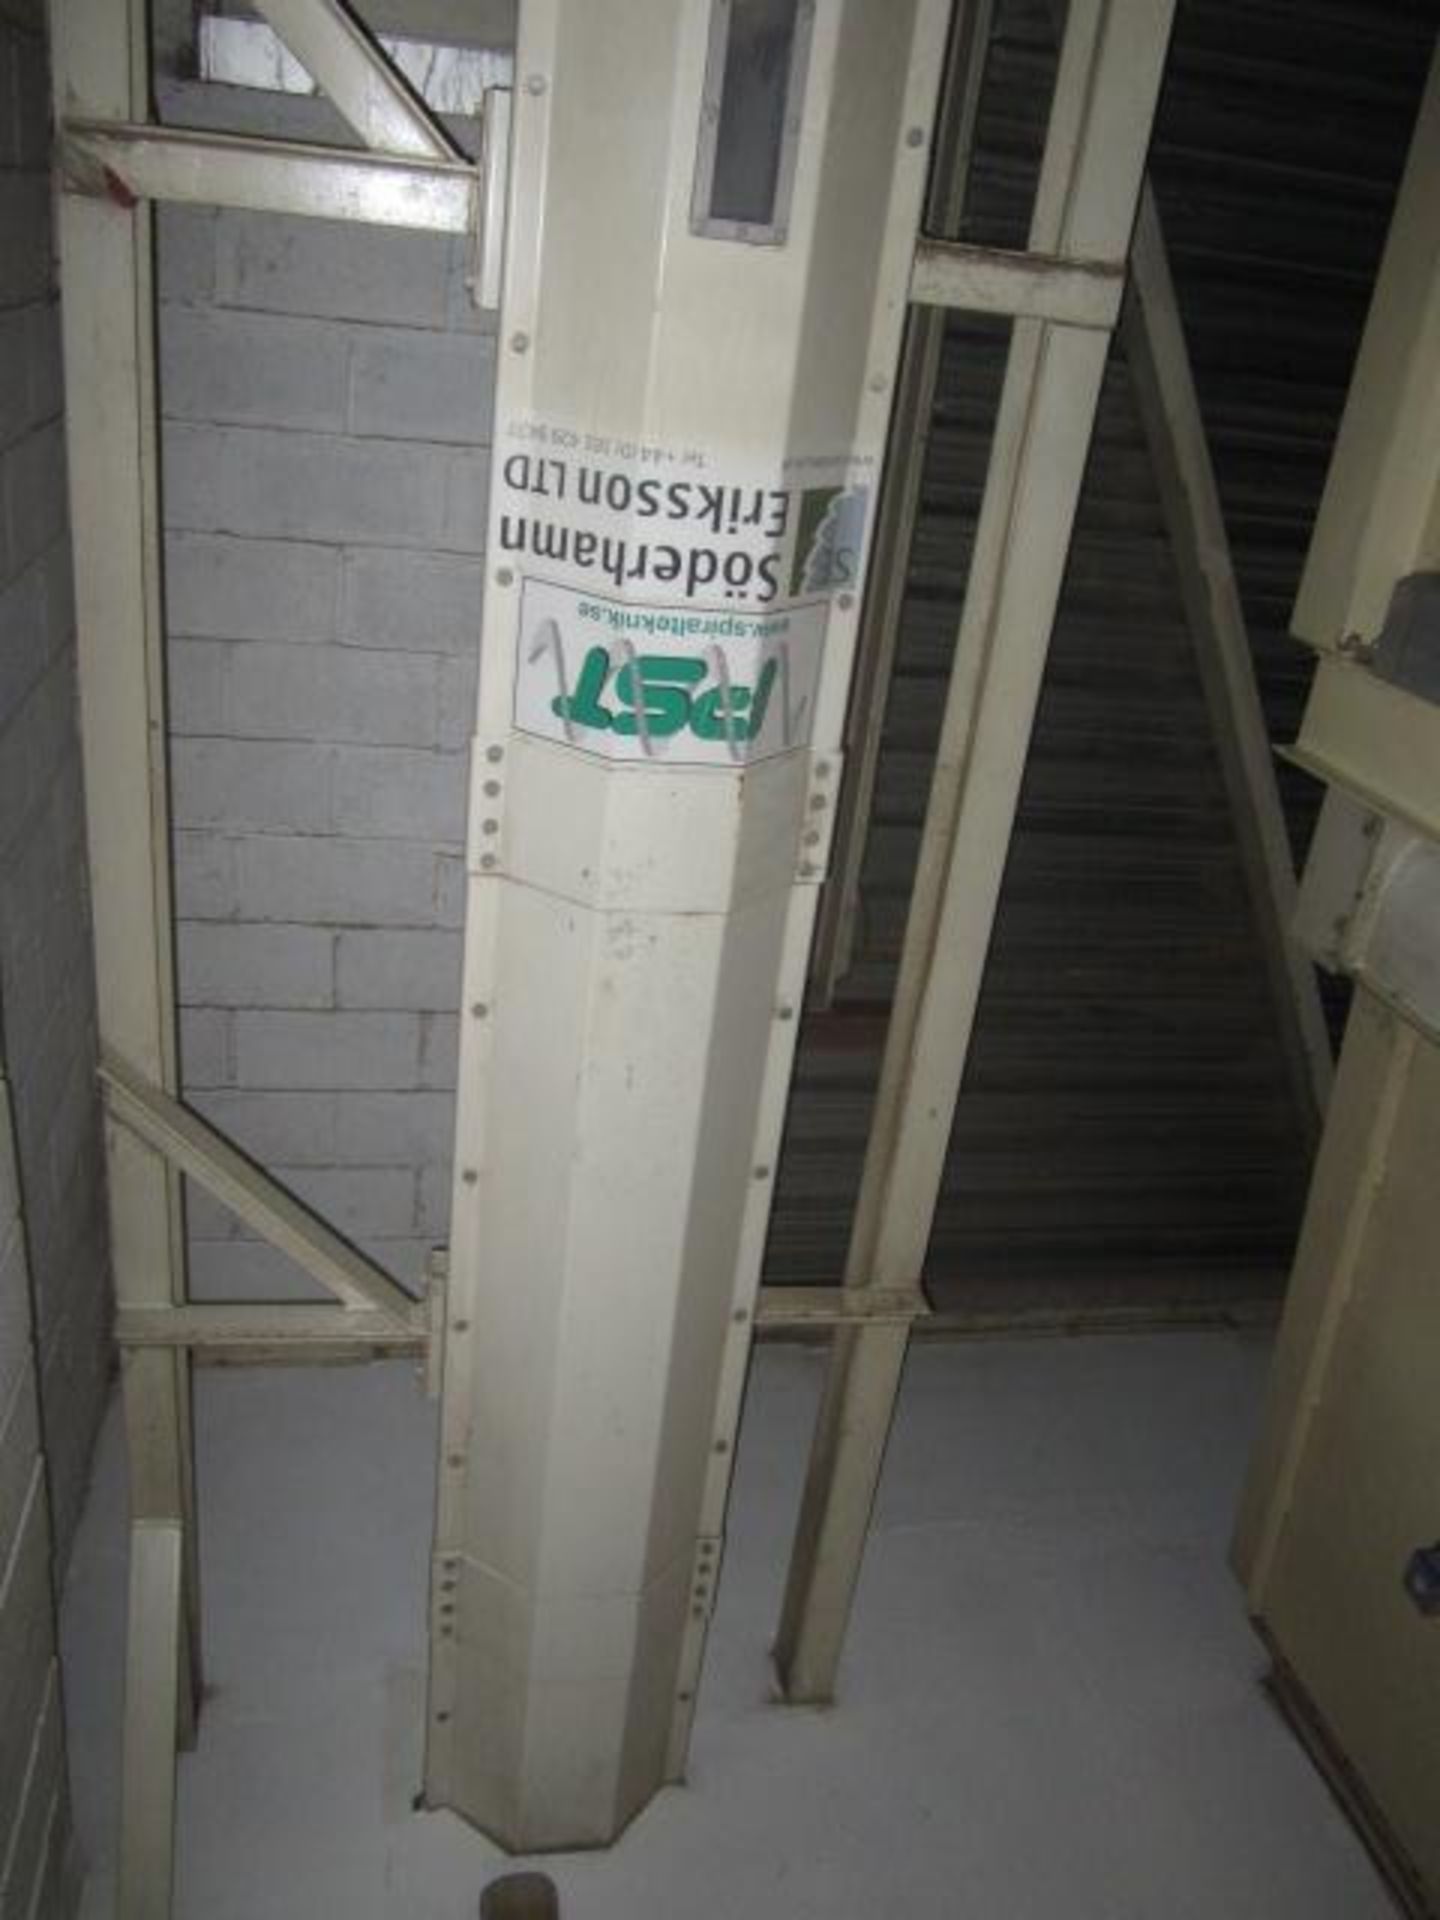 PST V8420 vertical auger screw conveyor, height approx. 8m x 400mm dia, serial no: 1031U16 (2010), - Image 4 of 5